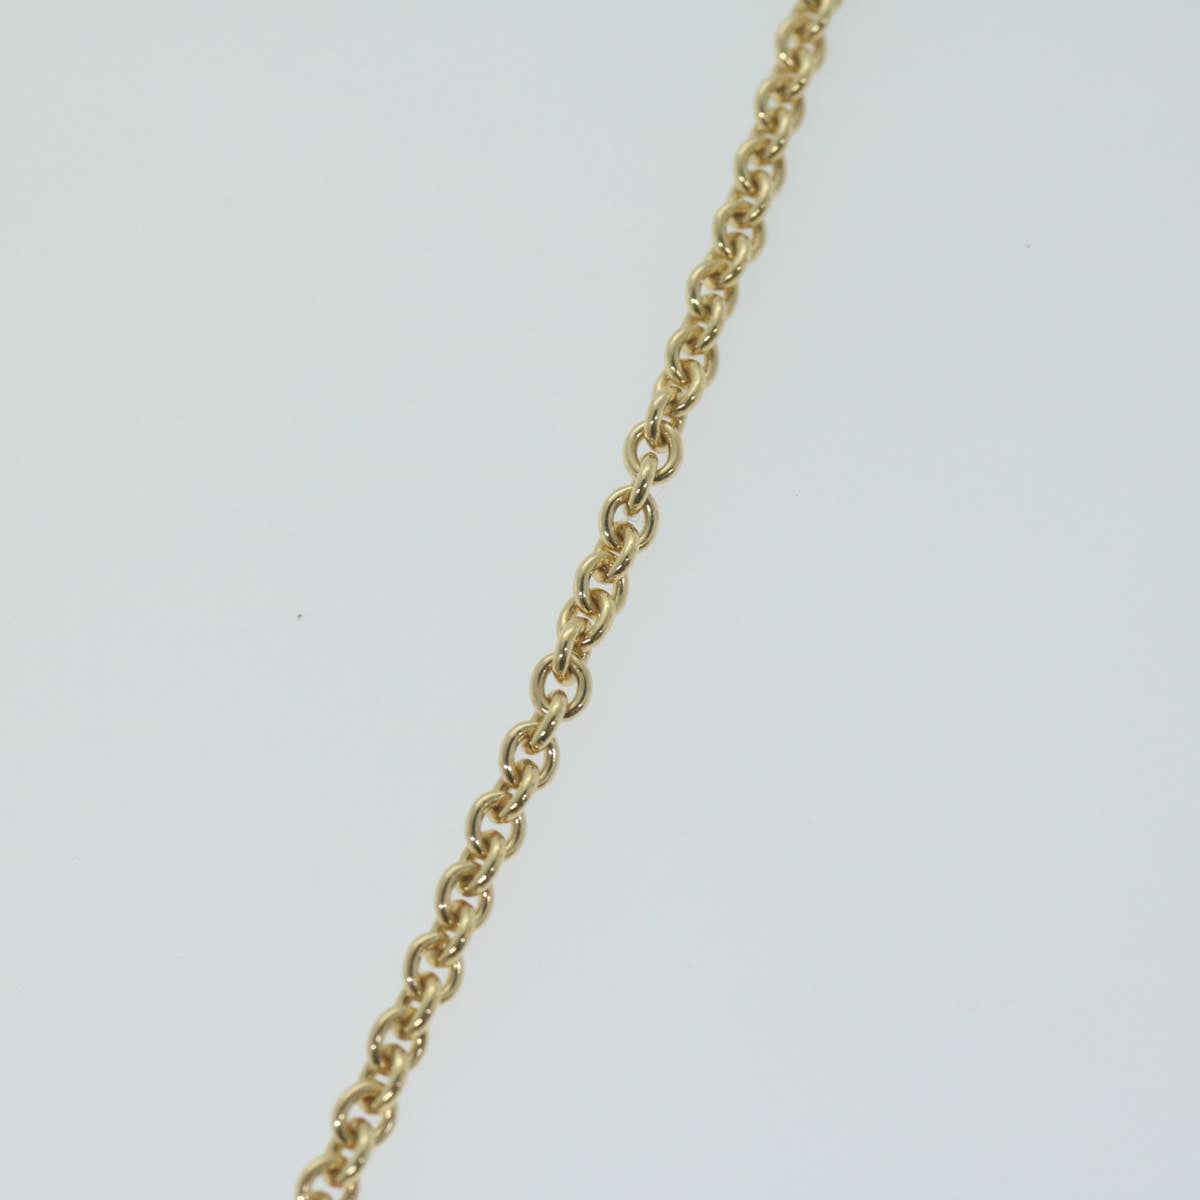 Christian Dior Necklace metal Gold Auth am5730